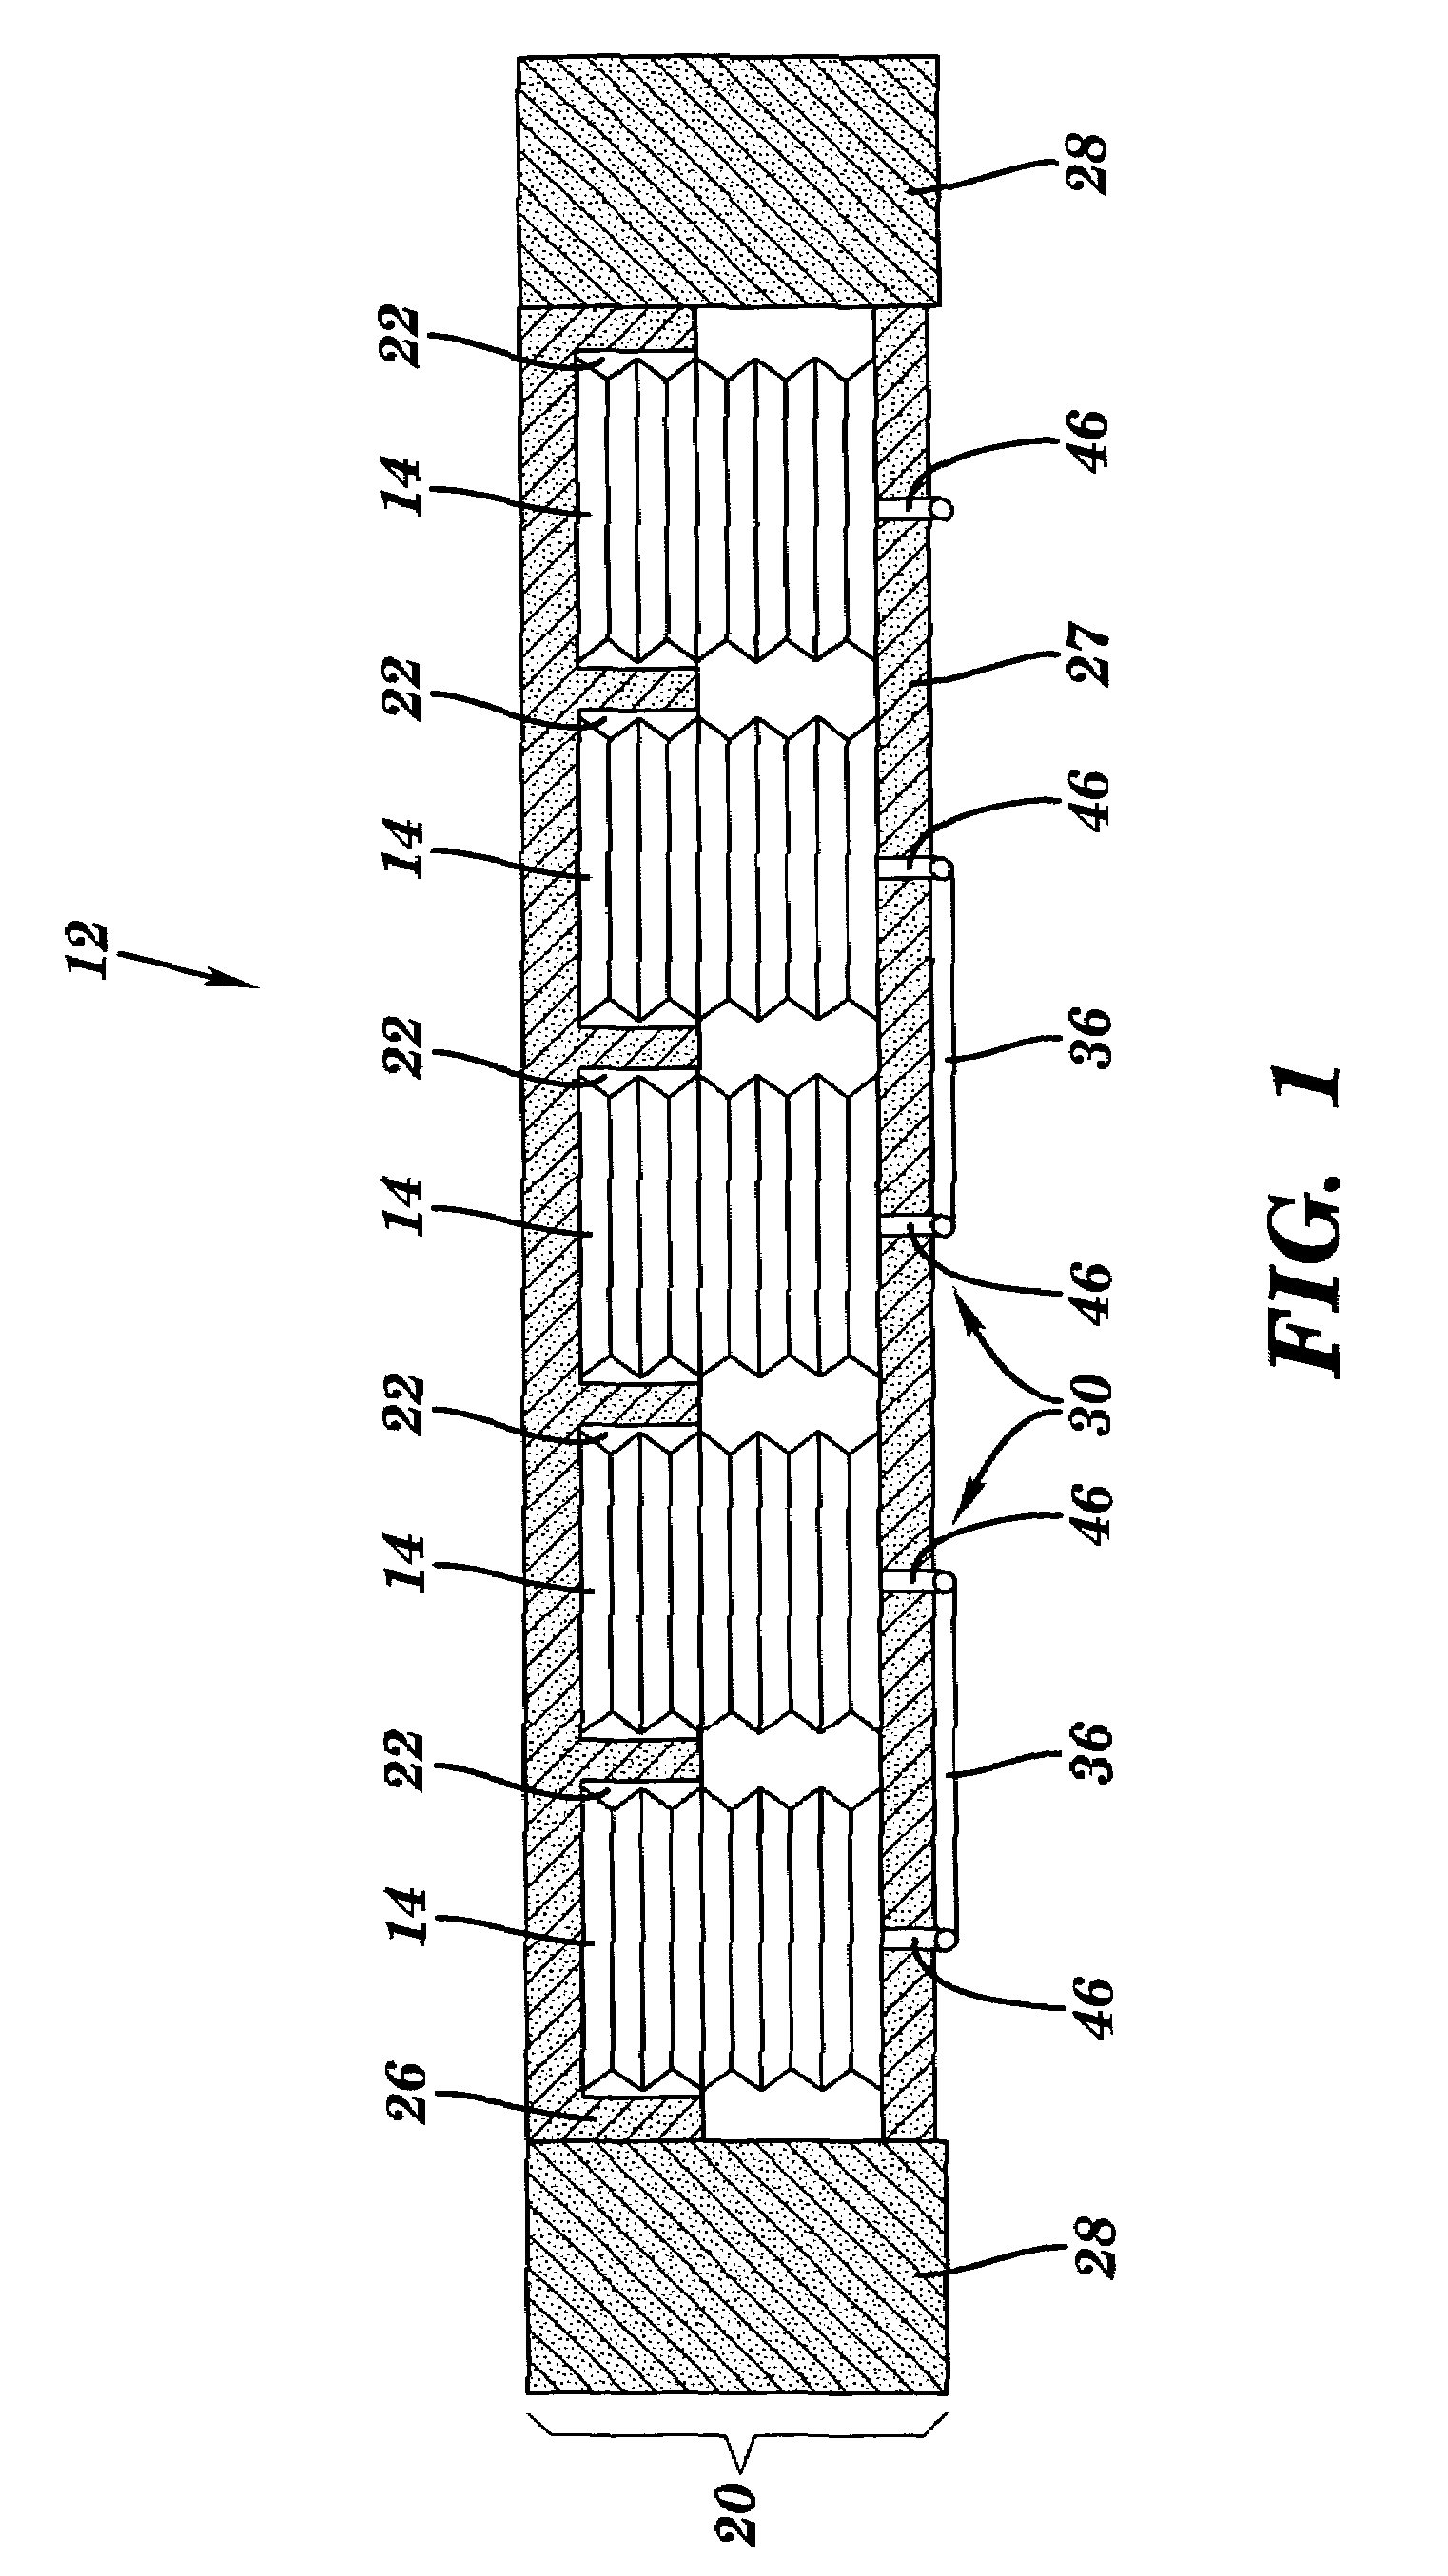 Discrete cell body support and method for using the same to provide dynamic massage